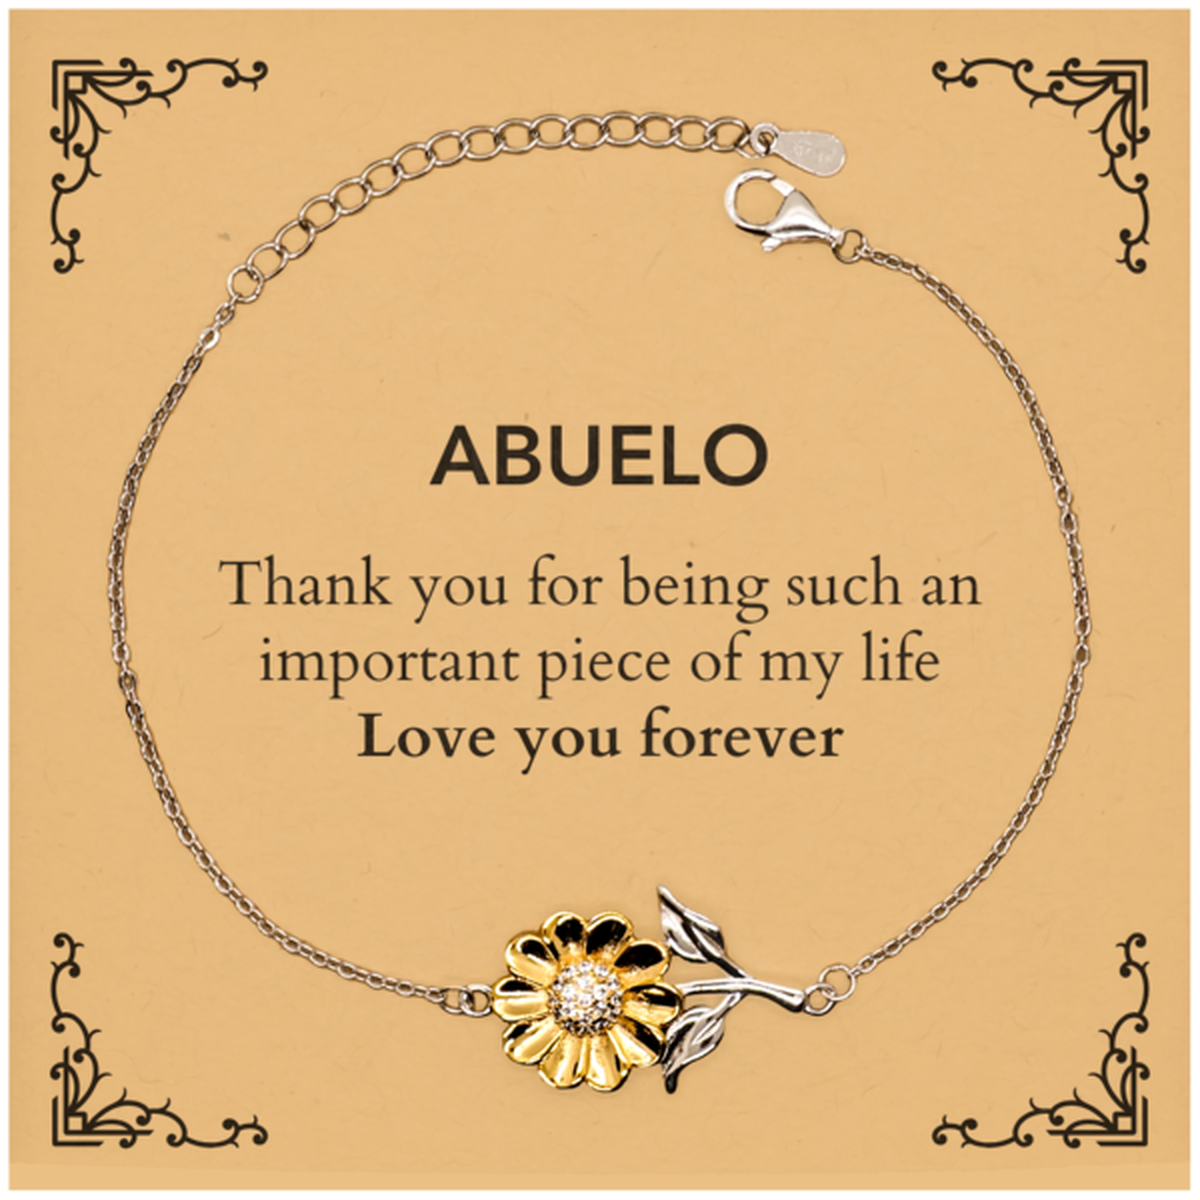 Appropriate Abuelo Sunflower Bracelet Epic Birthday Gifts for Abuelo Thank you for being such an important piece of my life Abuelo Christmas Mothers Fathers Day